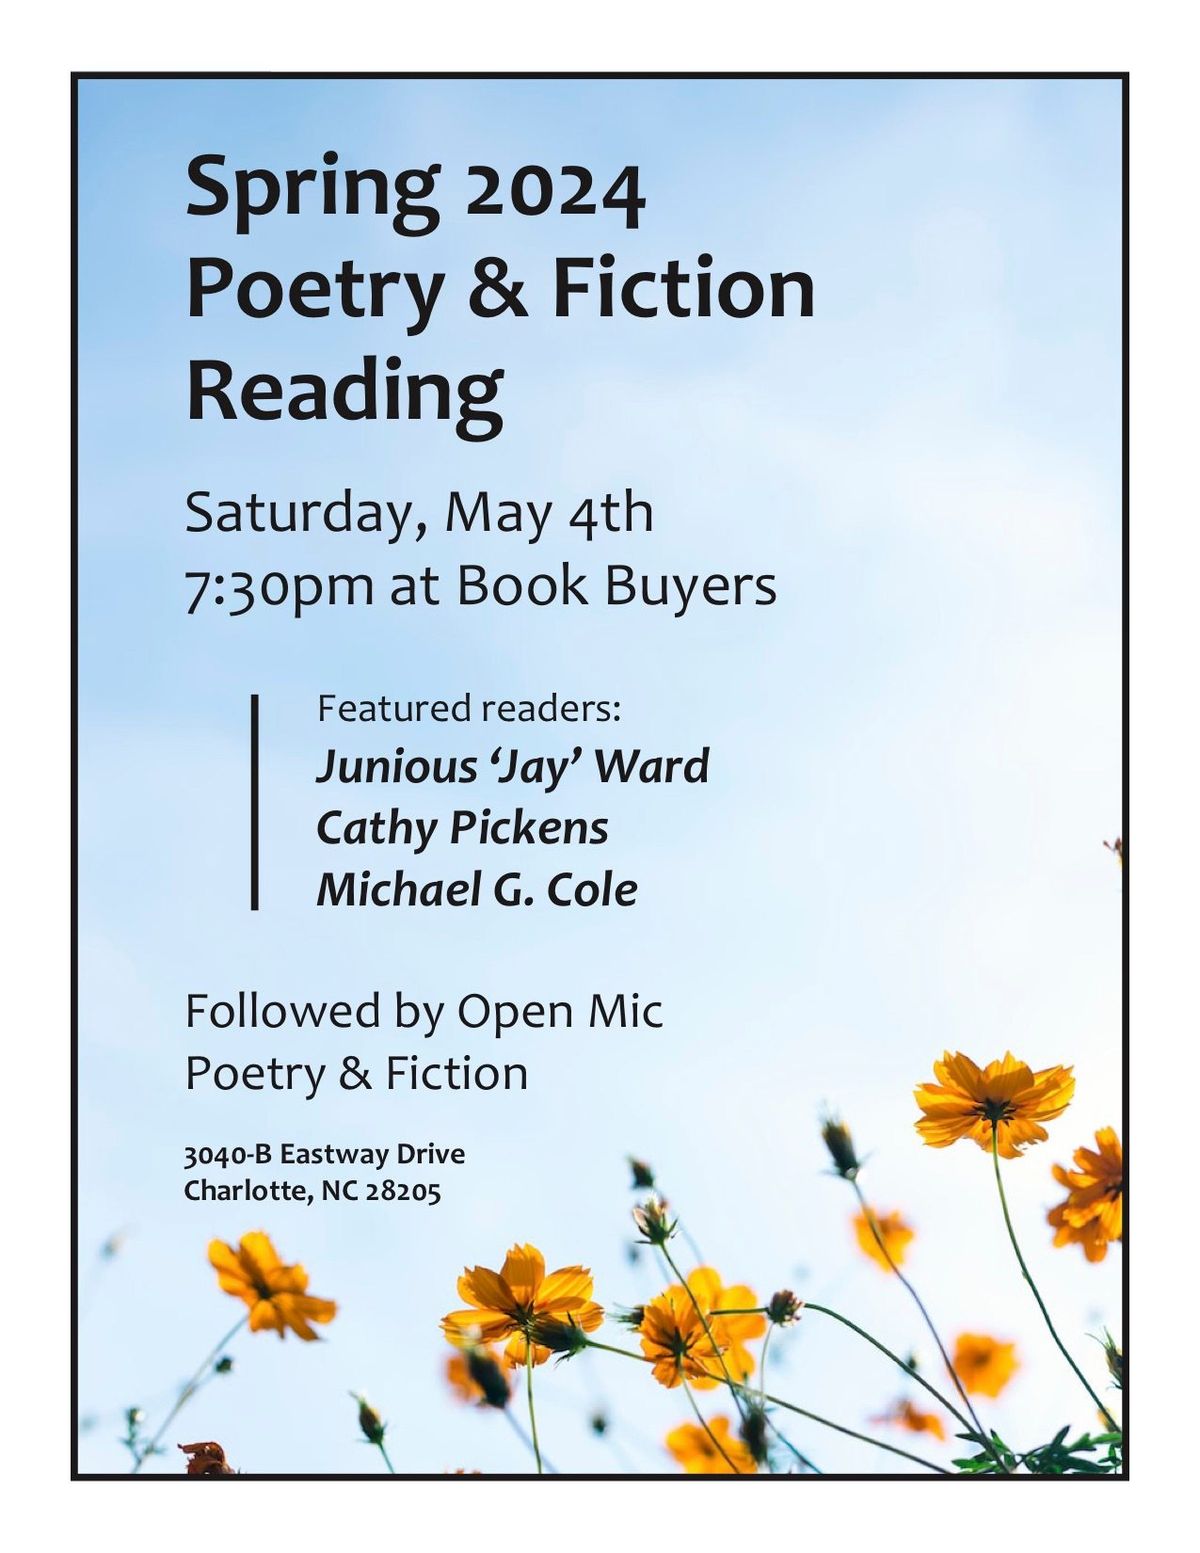 Book Buyers' Spring 2024 Poetry + Fiction Reading 